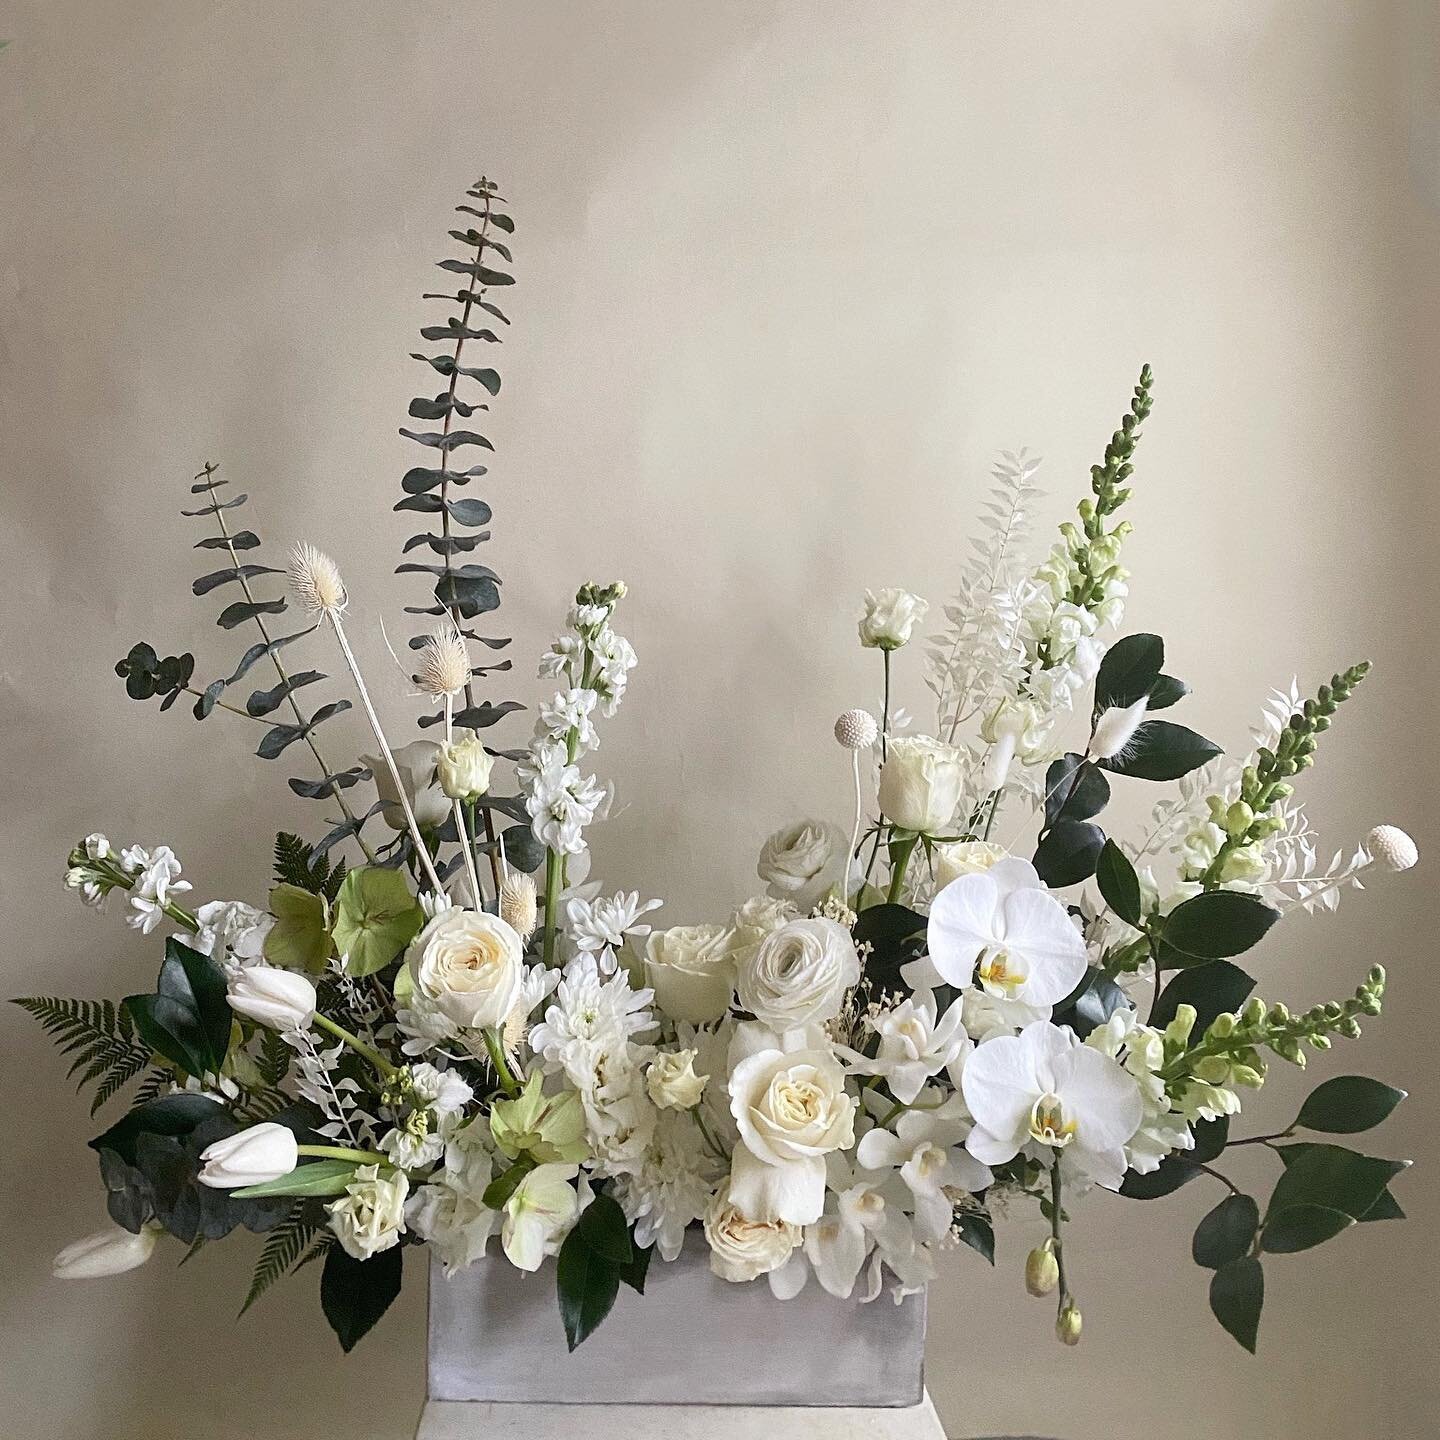 This week is going to be a pretty busy one for this floral team, so starting off this Monday morning with a little moment of calm and this simple white &amp; green beauty. 
⠀⠀⠀⠀⠀⠀⠀⠀⠀
What would you like to see this week?! We've got some beautiful eve